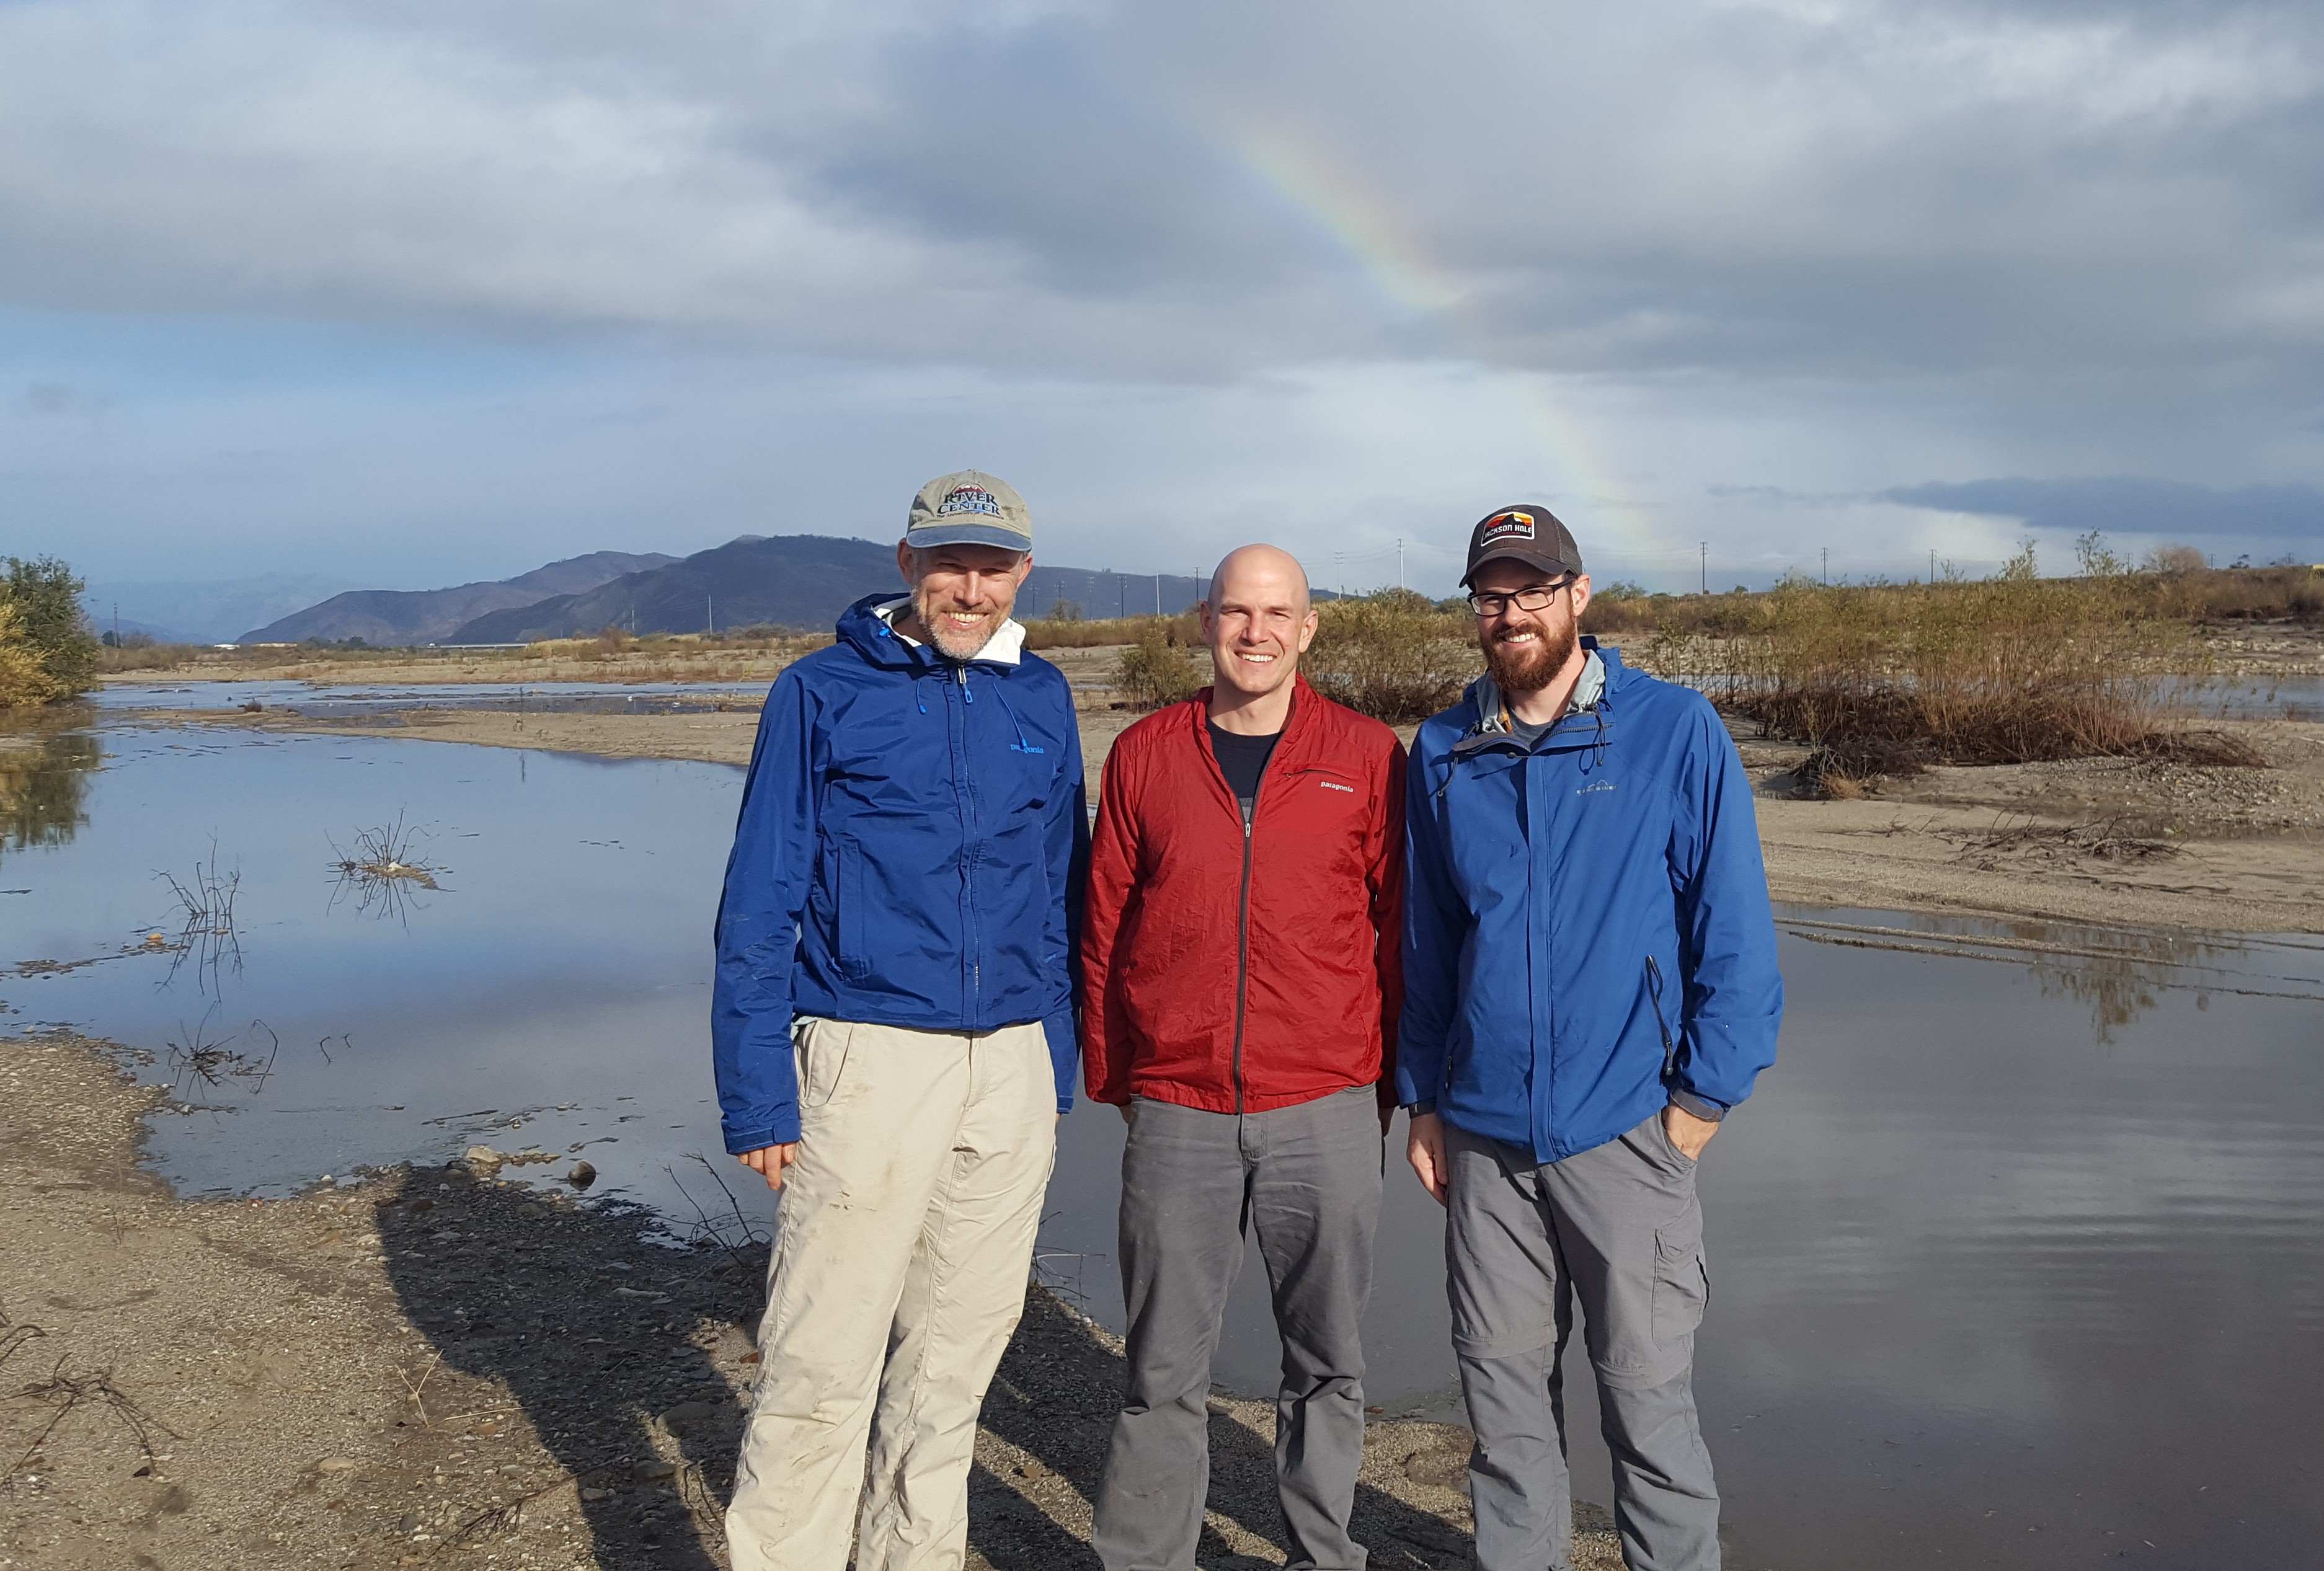 Andrew Wilcox, Eric Hallstein (TNC), and Jordan Gilbert on the bank of the lower Santa Clara River in southern California.